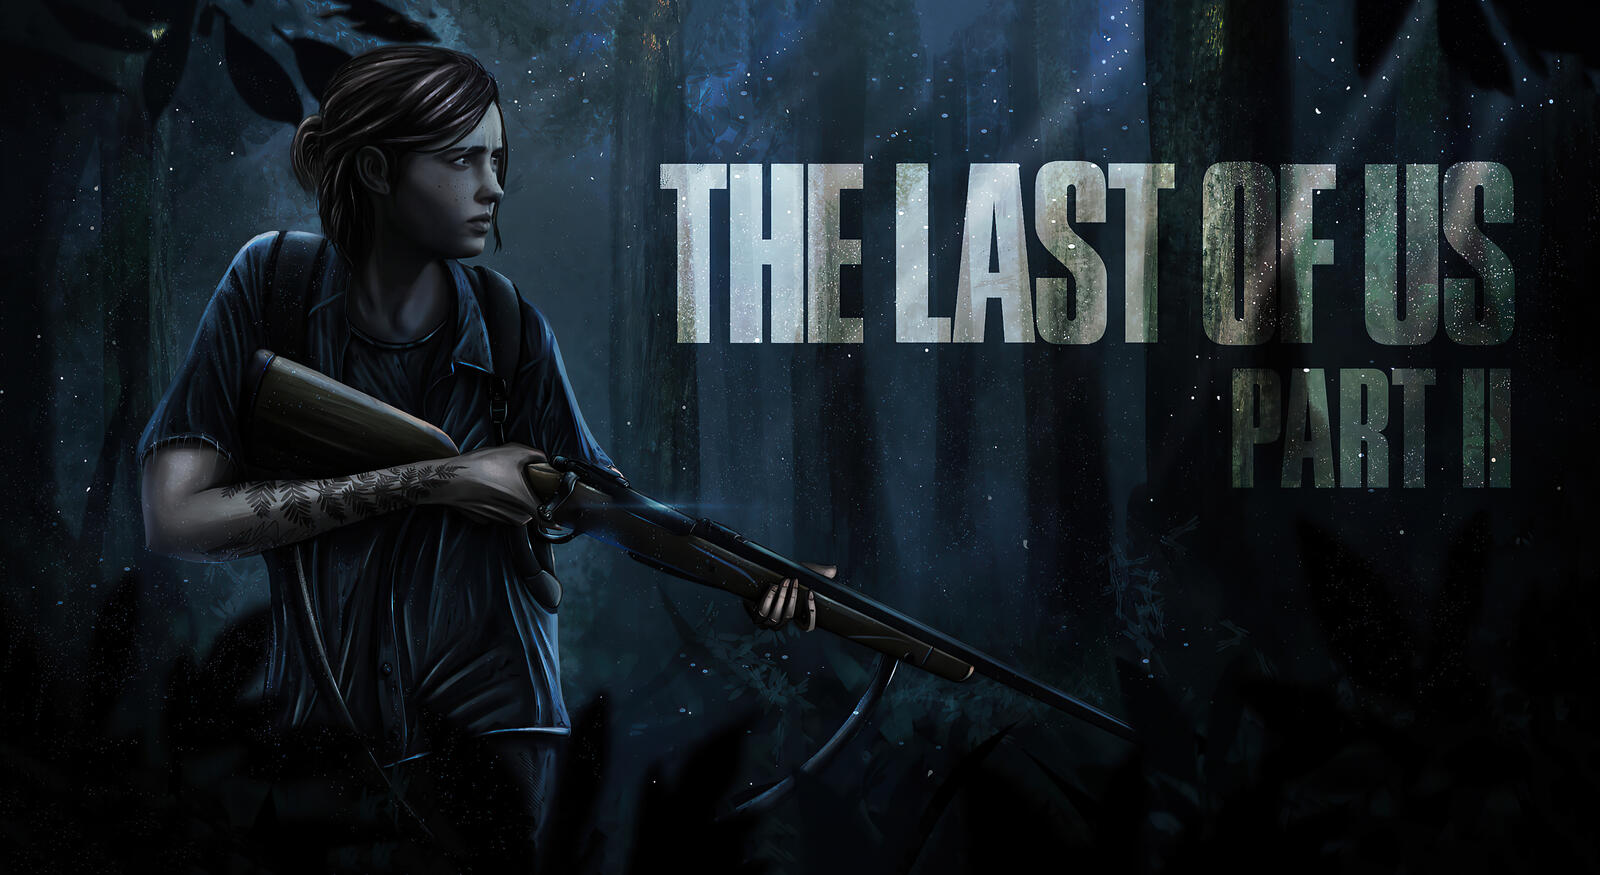 Wallpapers the last of us part 2 games 2019 the last of us on the desktop